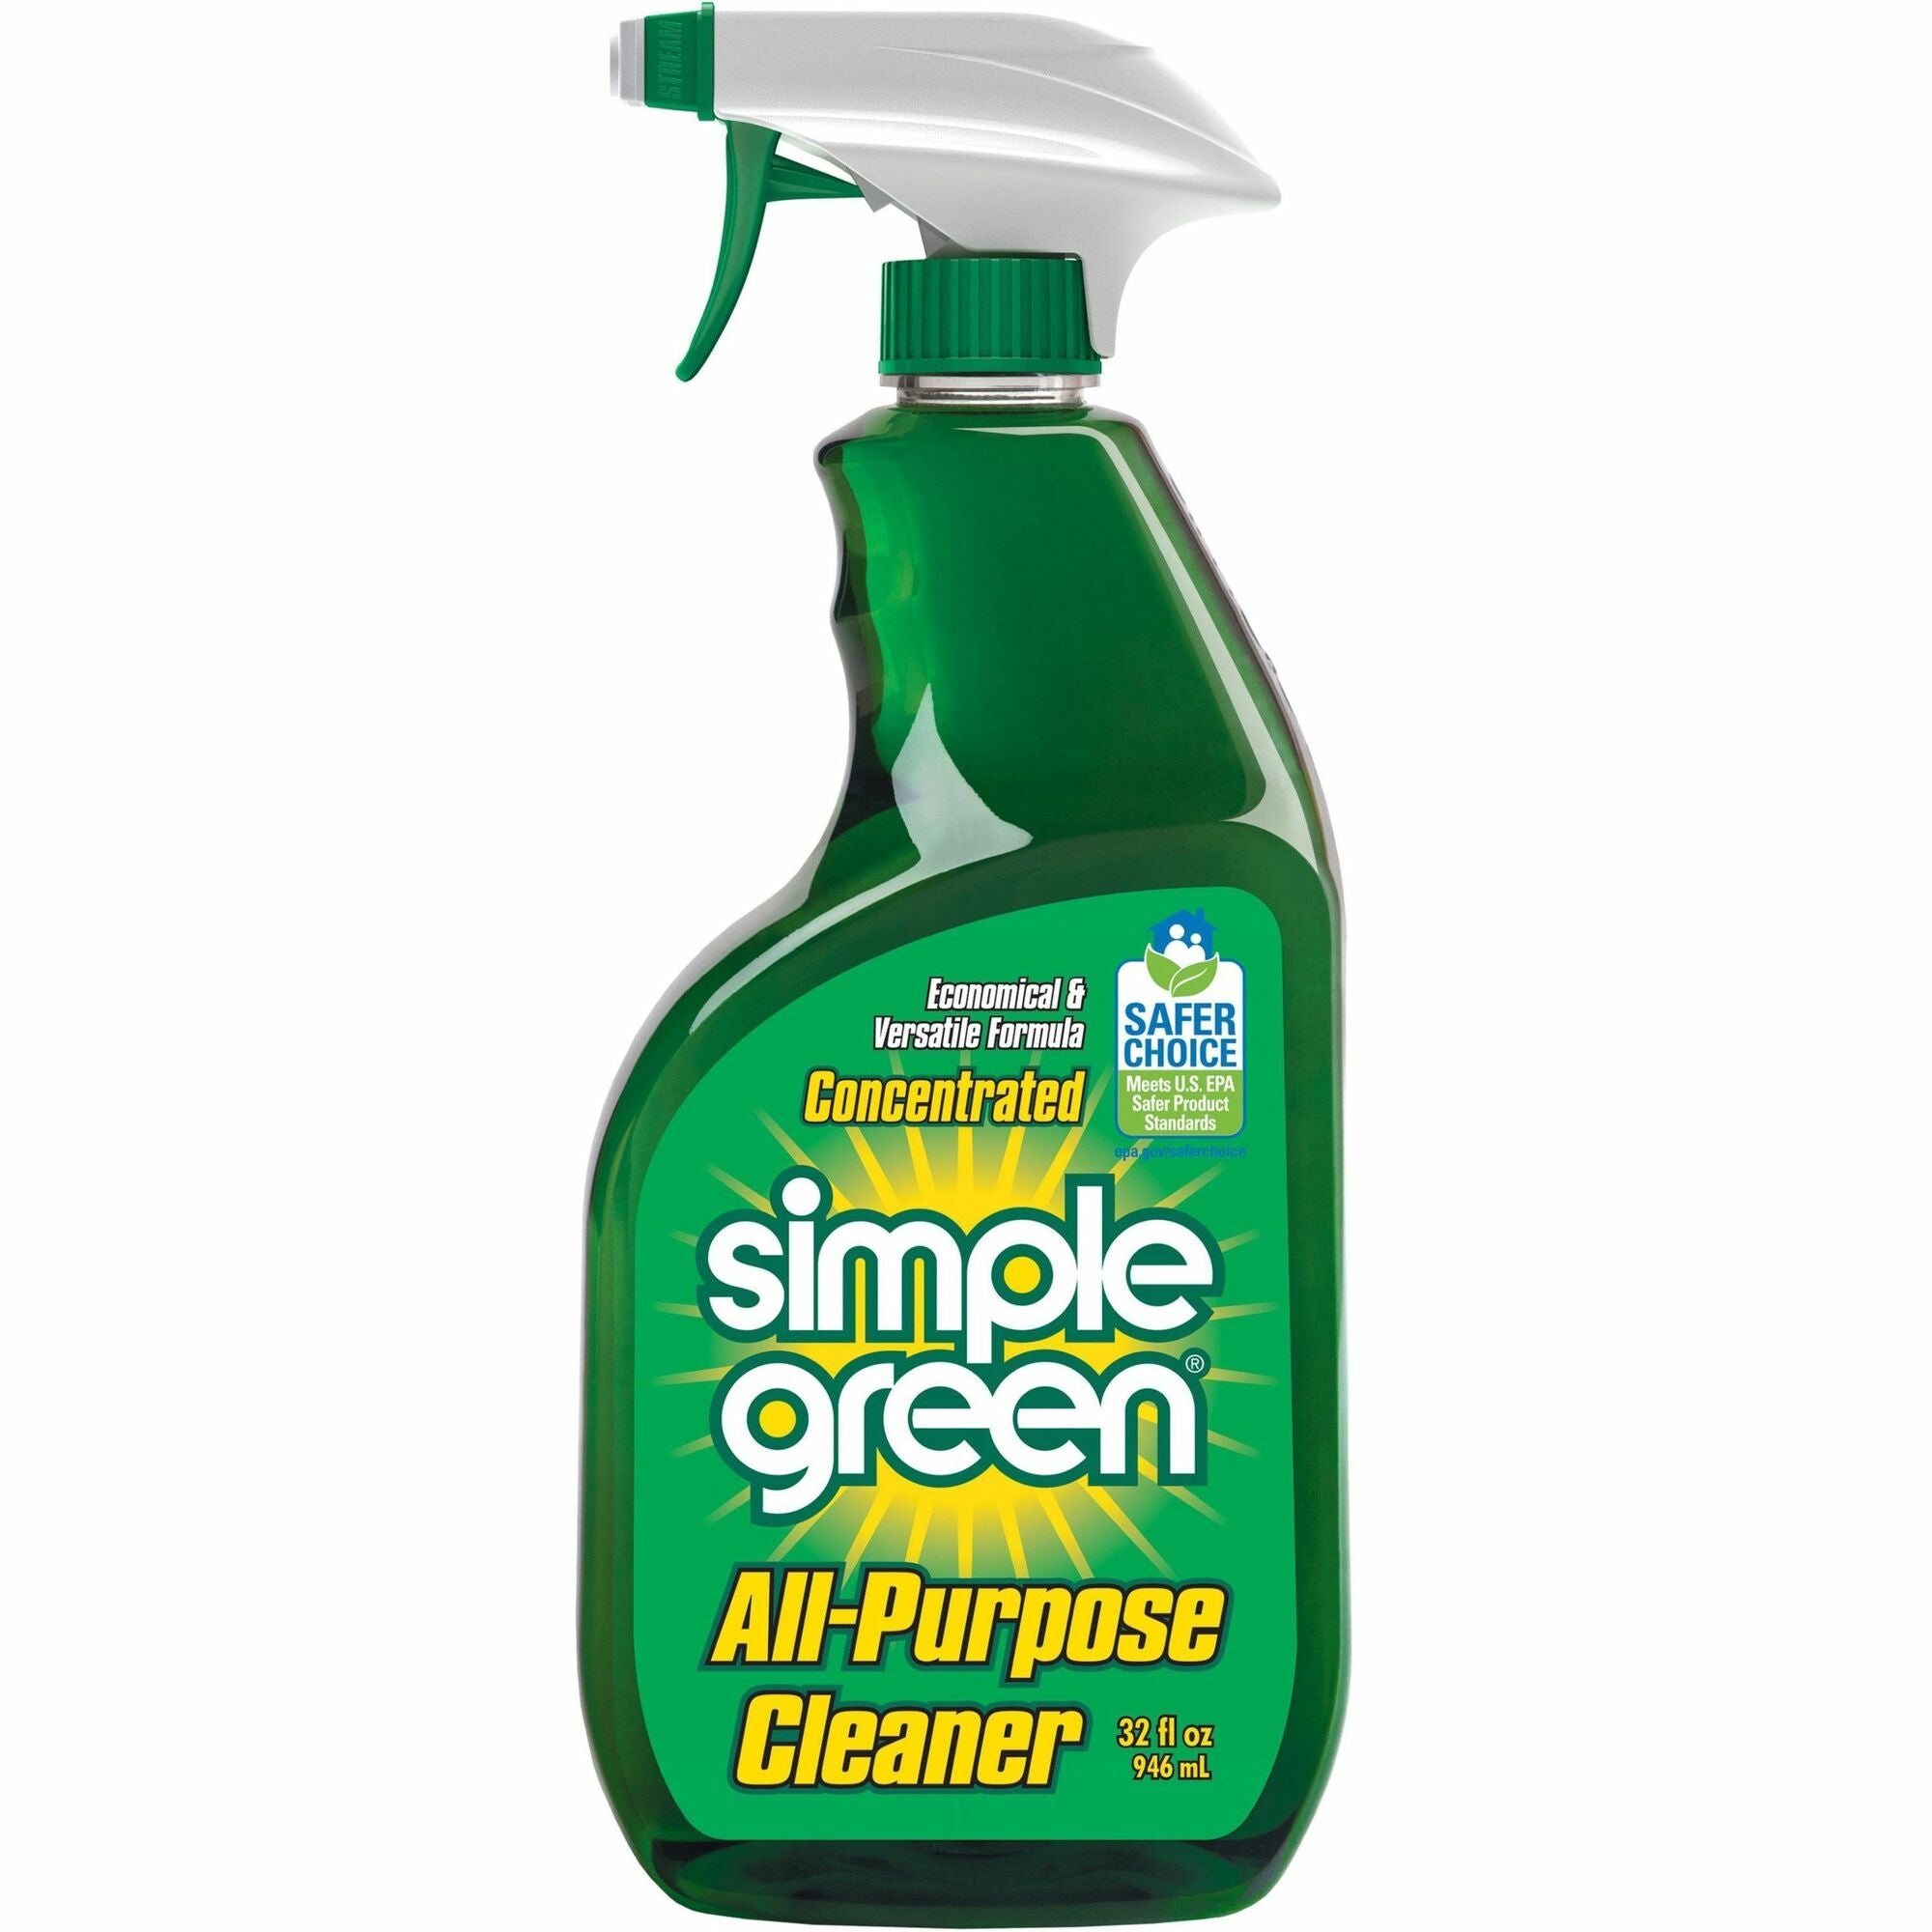 simple-green-all-purpose-concentrated-cleaner-concentrate-32-fl-oz-1-quart-12-carton-non-toxic-streak-free-smudge-free-green_smp13033ct - 1